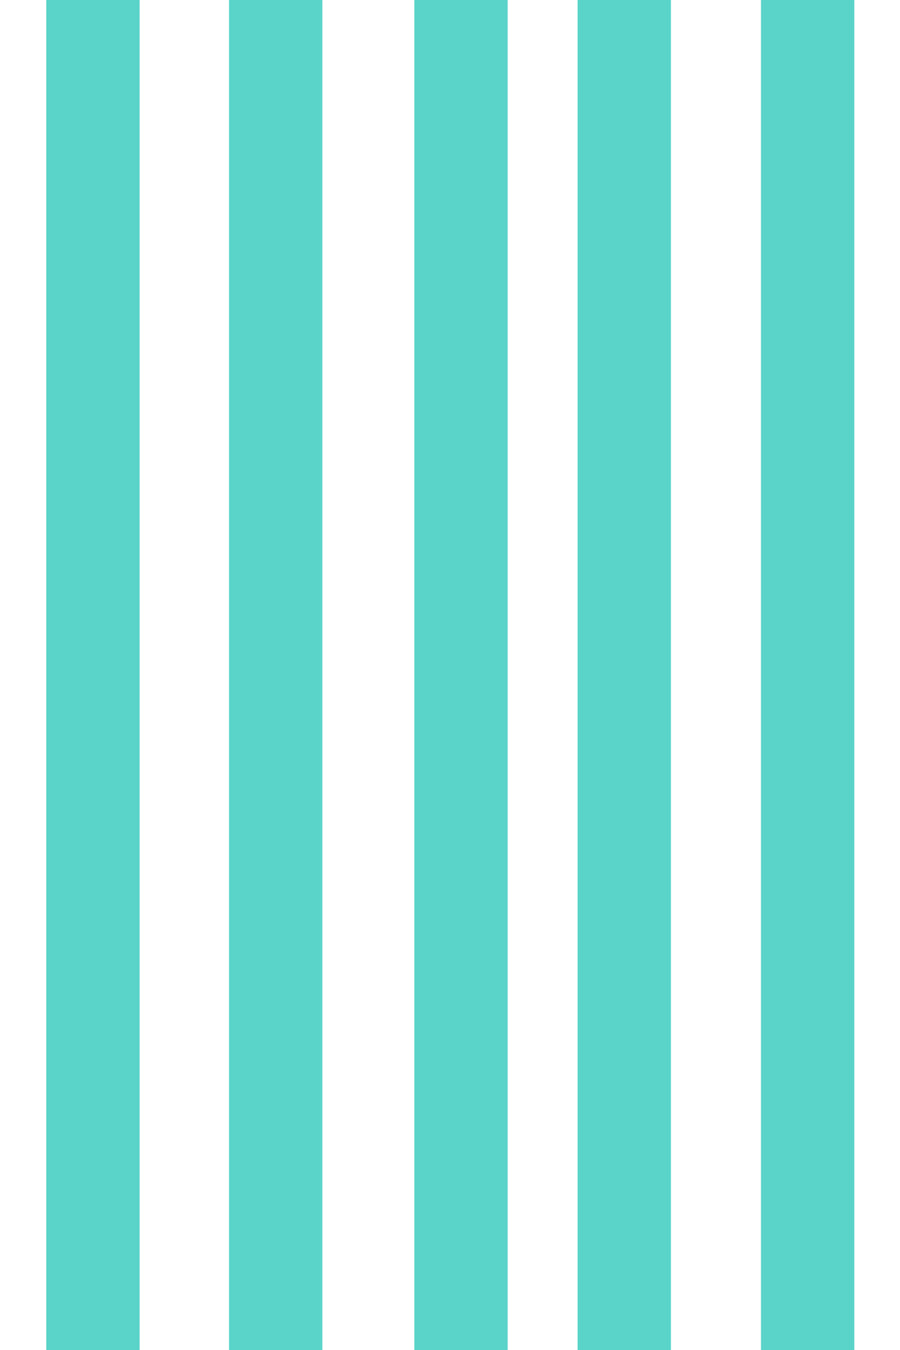 Woolf With Me Fitted Crib Sheet Stripes color_teal